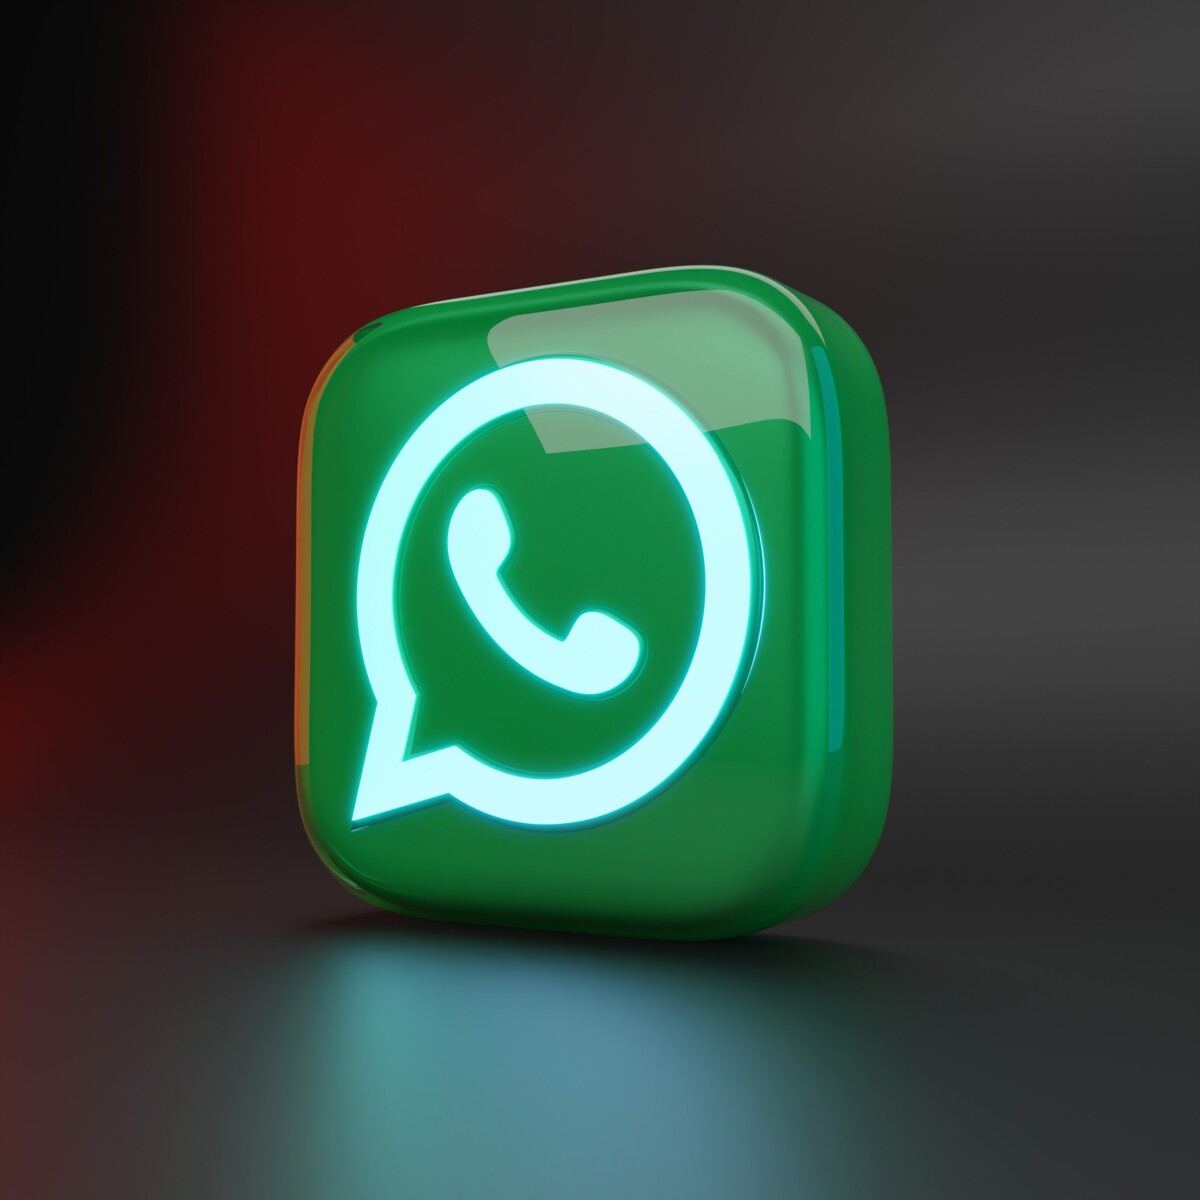 WhatsApp: 5 interesting new features to boost statuses